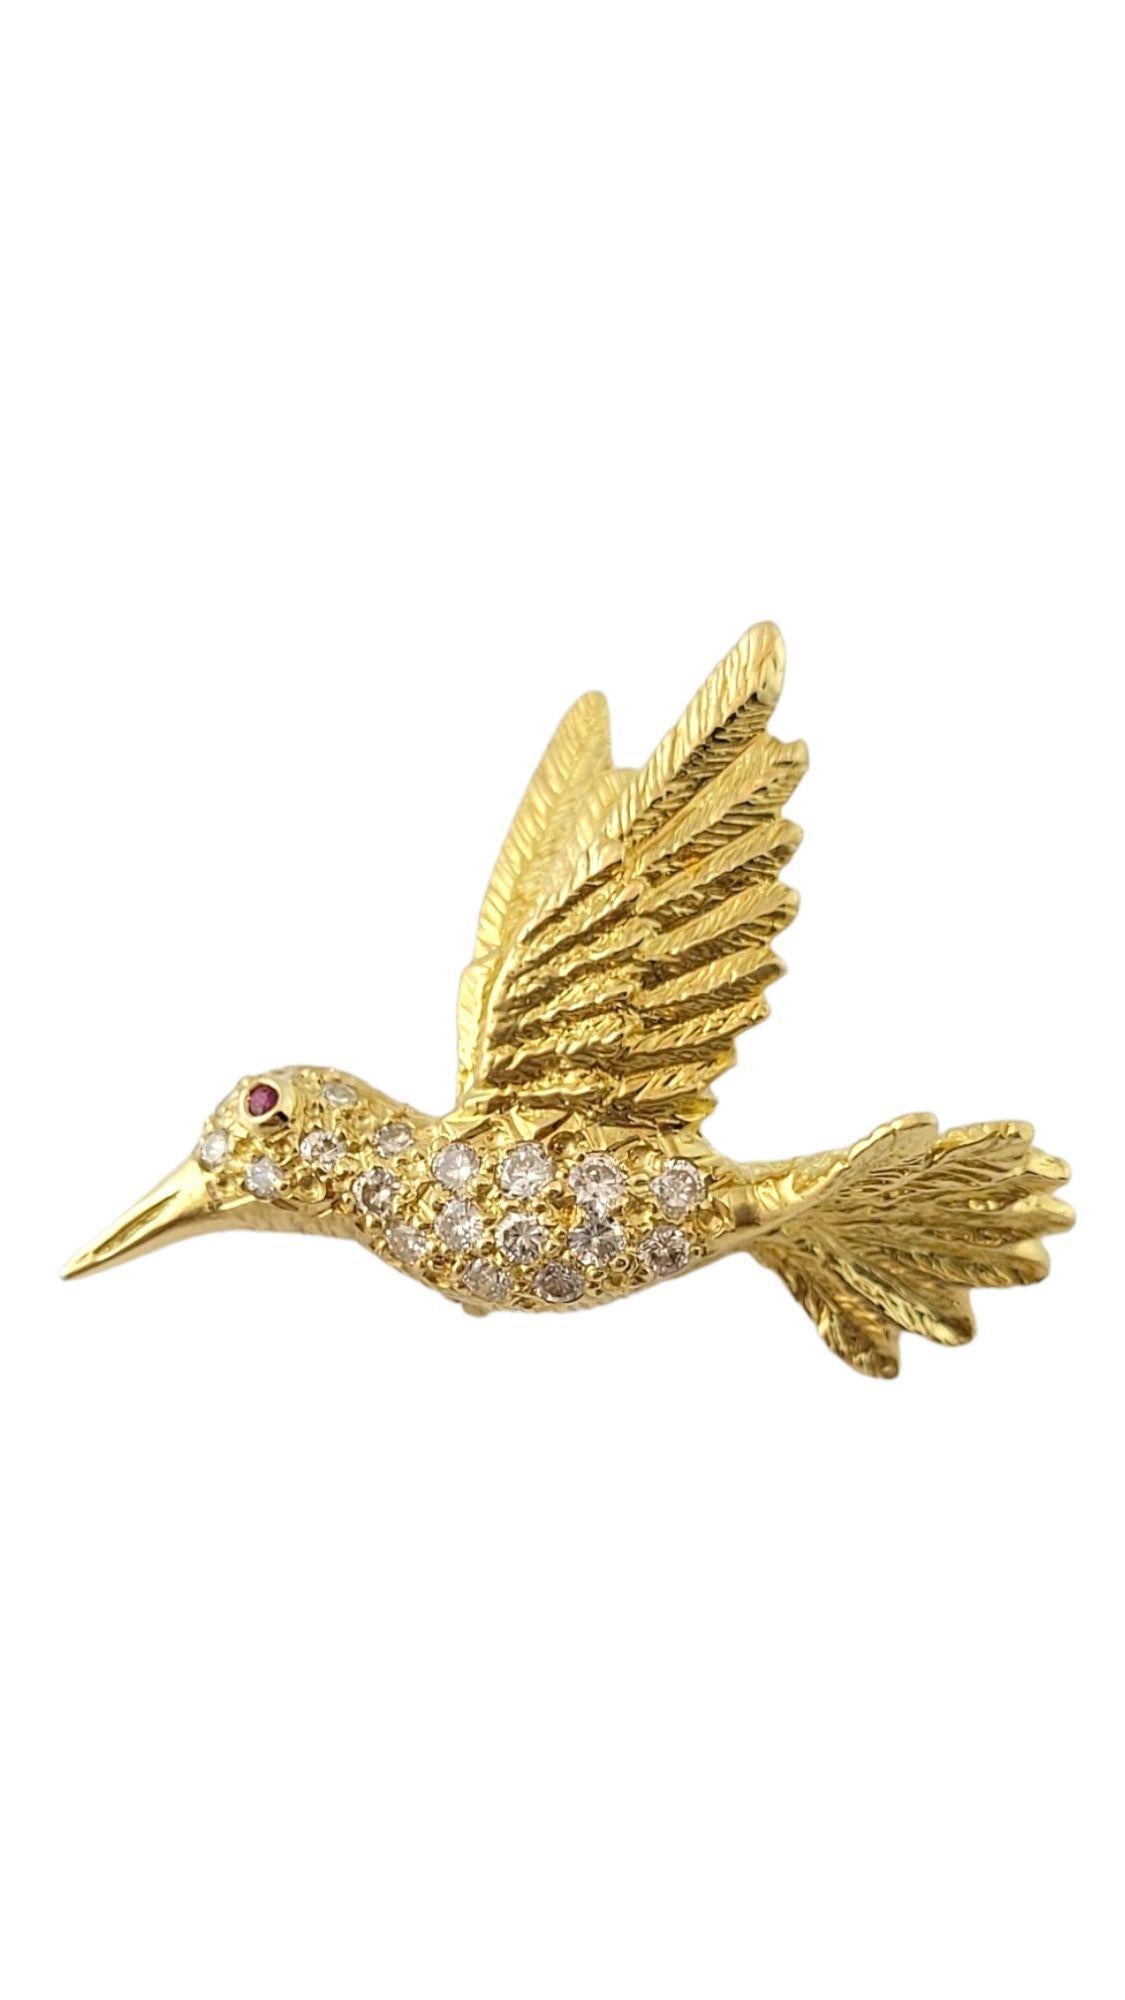 Vintage 18K Yellow Gold Diamond Hummingbird Pin 

This adorable hummingbird pin is crafted with meticulous detail out of 18K yellow gold and features 19 sparkling, round brilliant cut diamonds!

Approximate total diamond weight: .20 cts

Diamond